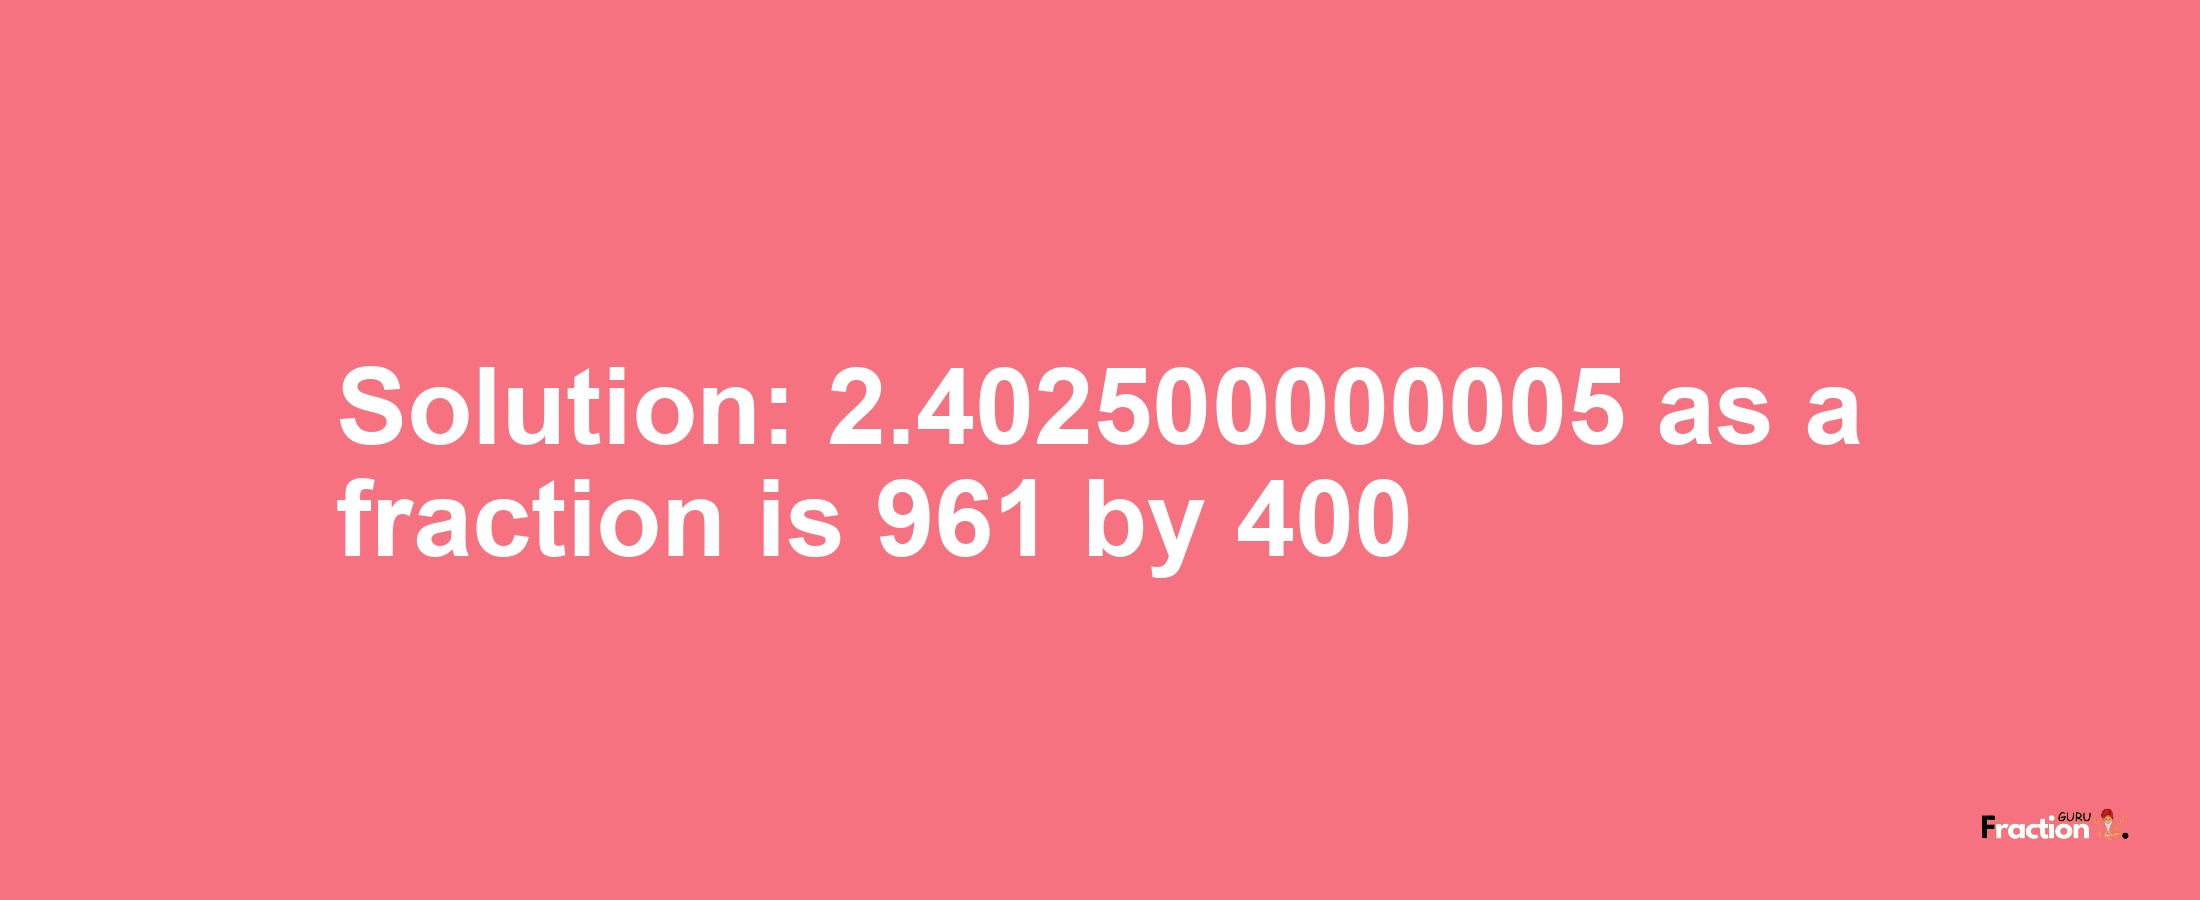 Solution:2.402500000005 as a fraction is 961/400